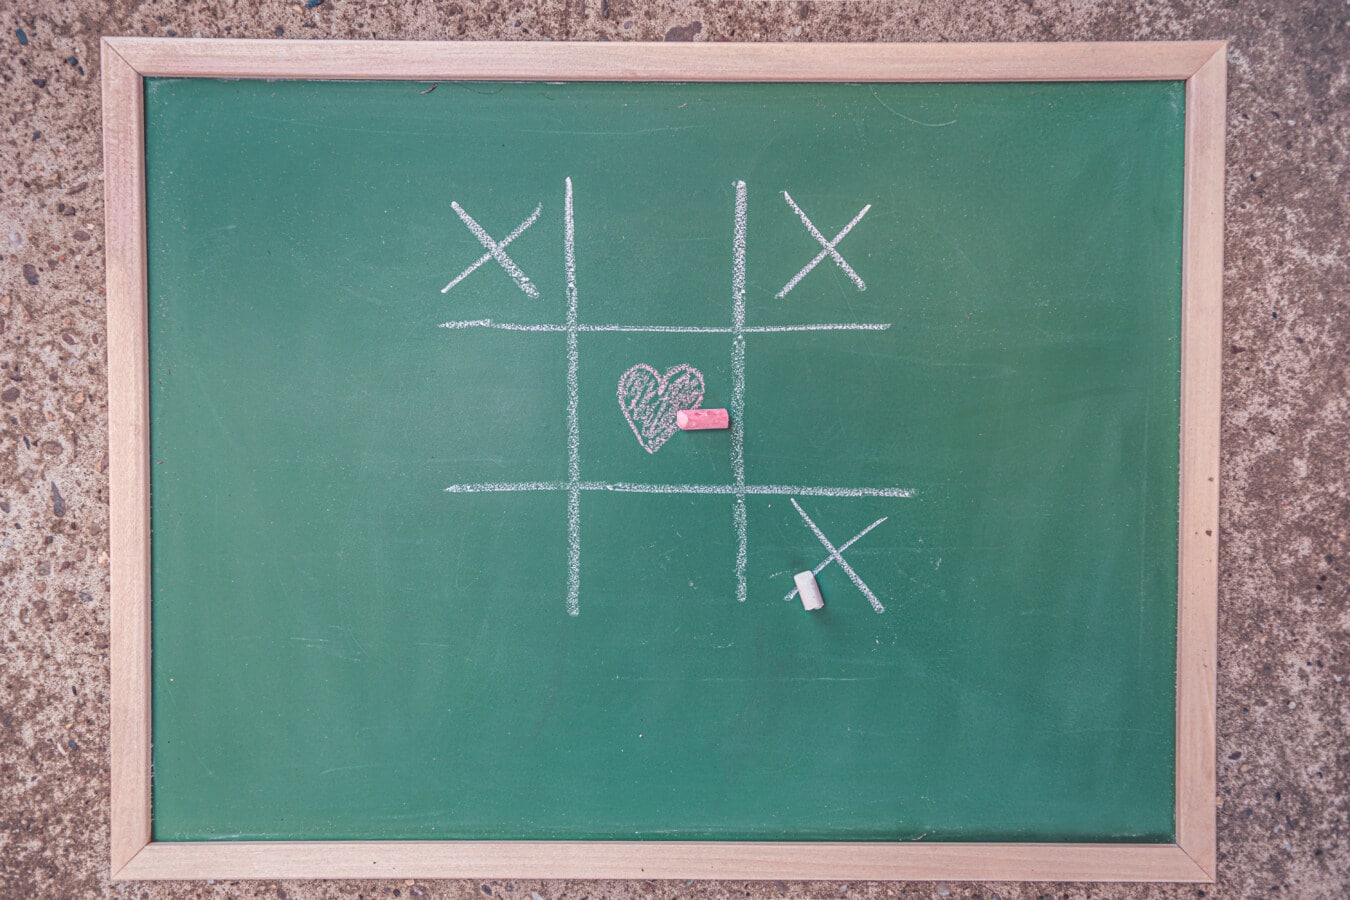 love problem, Tic-Tac-Toe game, noughts and crosses, heart, drawing chalk, blackboard, vintage, old